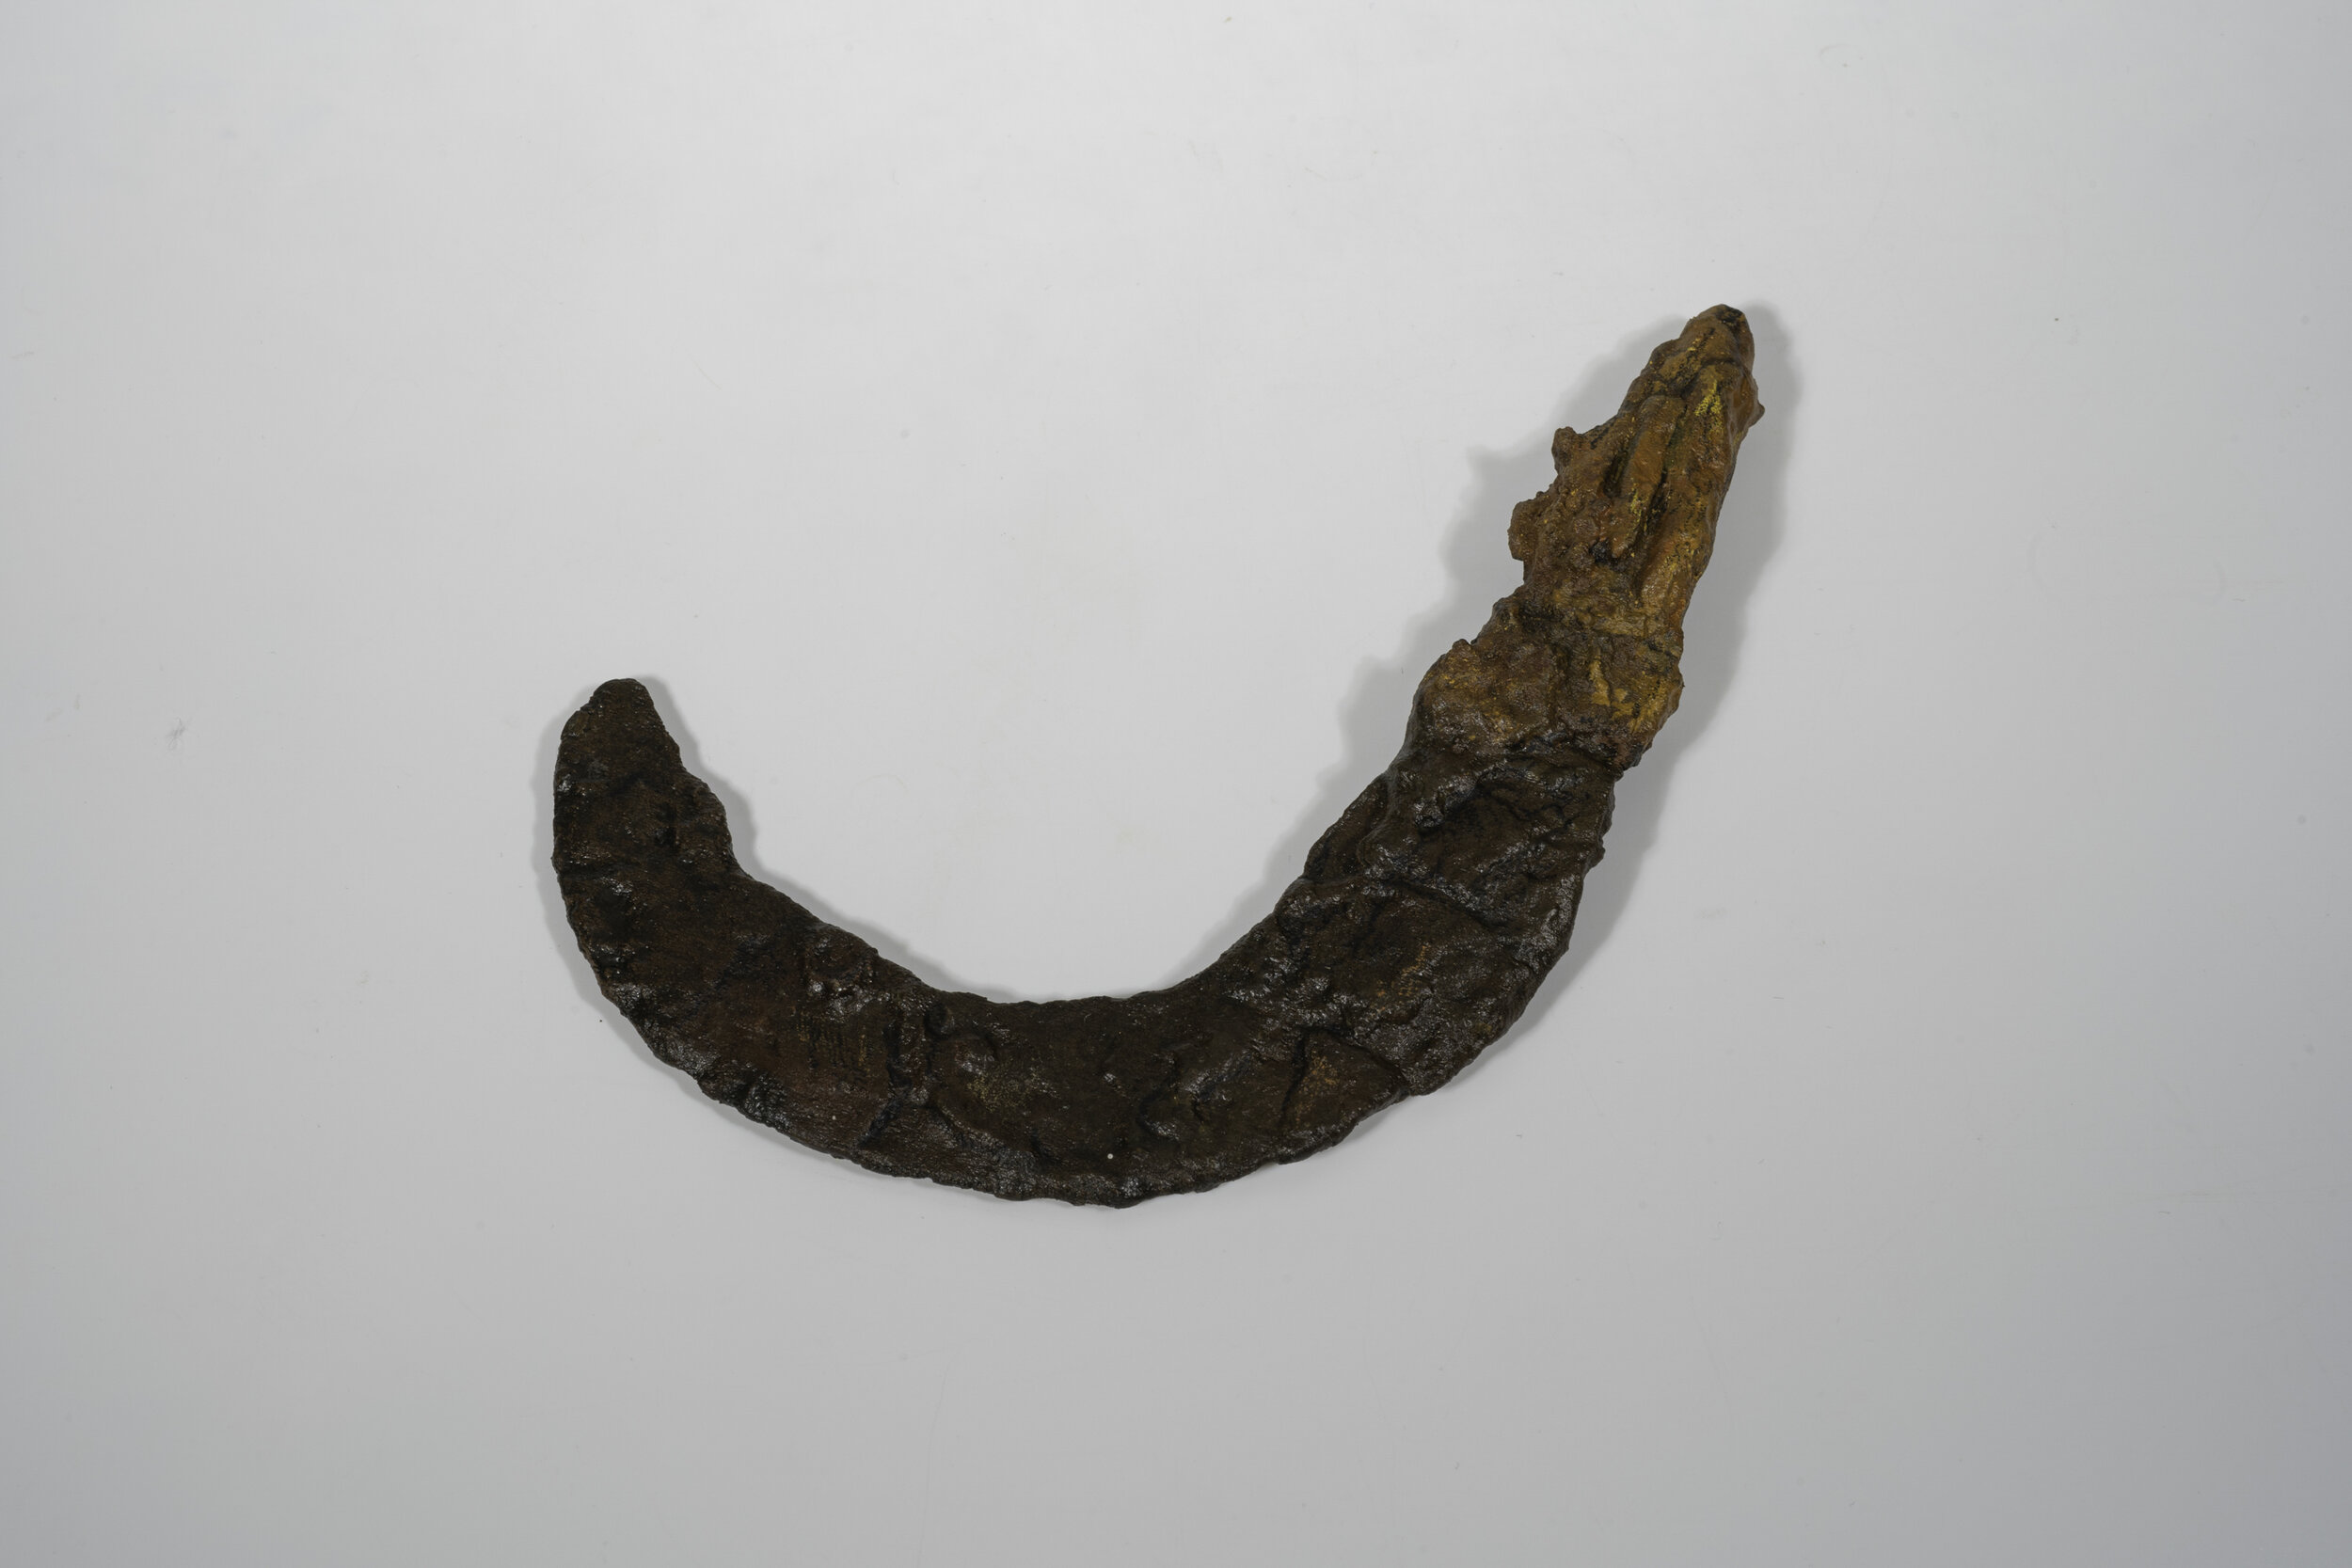   Finished 3D print of the reaping hook | Image: AOC Archaeology  